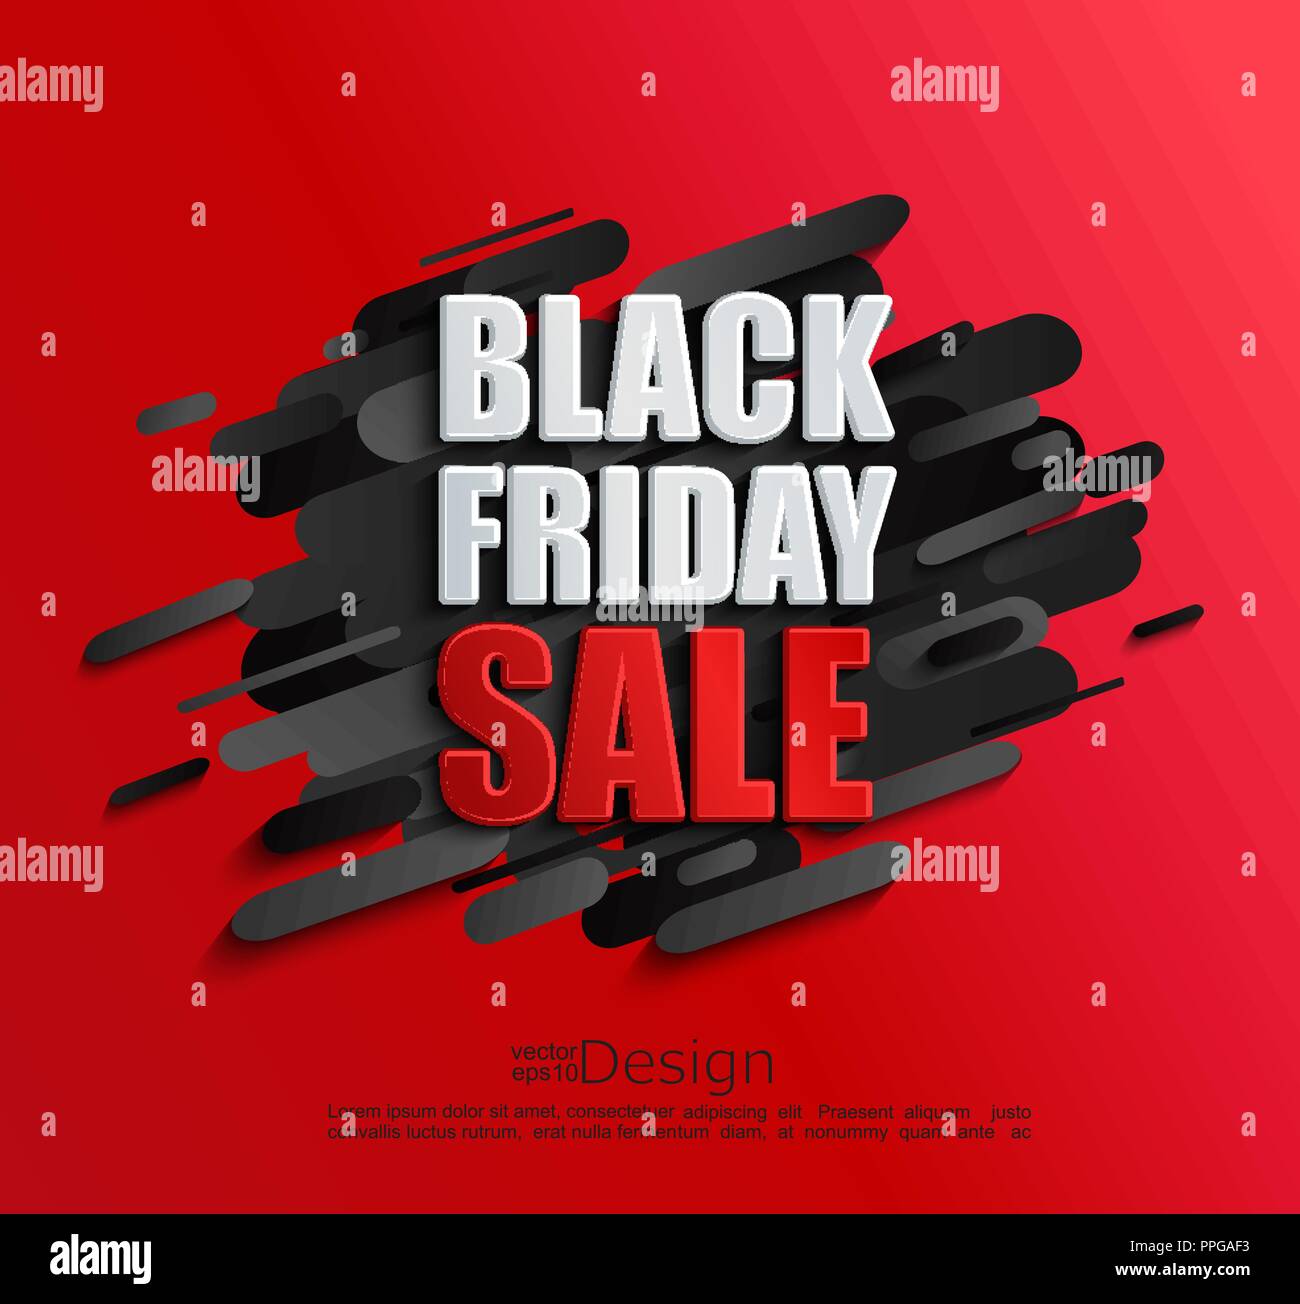 Sale banner for black friday on dynamic red background. Perfect template for flyers, discount cards, web, posters, ad, promotions, blogs and social media, marketing. Vector illustration. Stock Vector